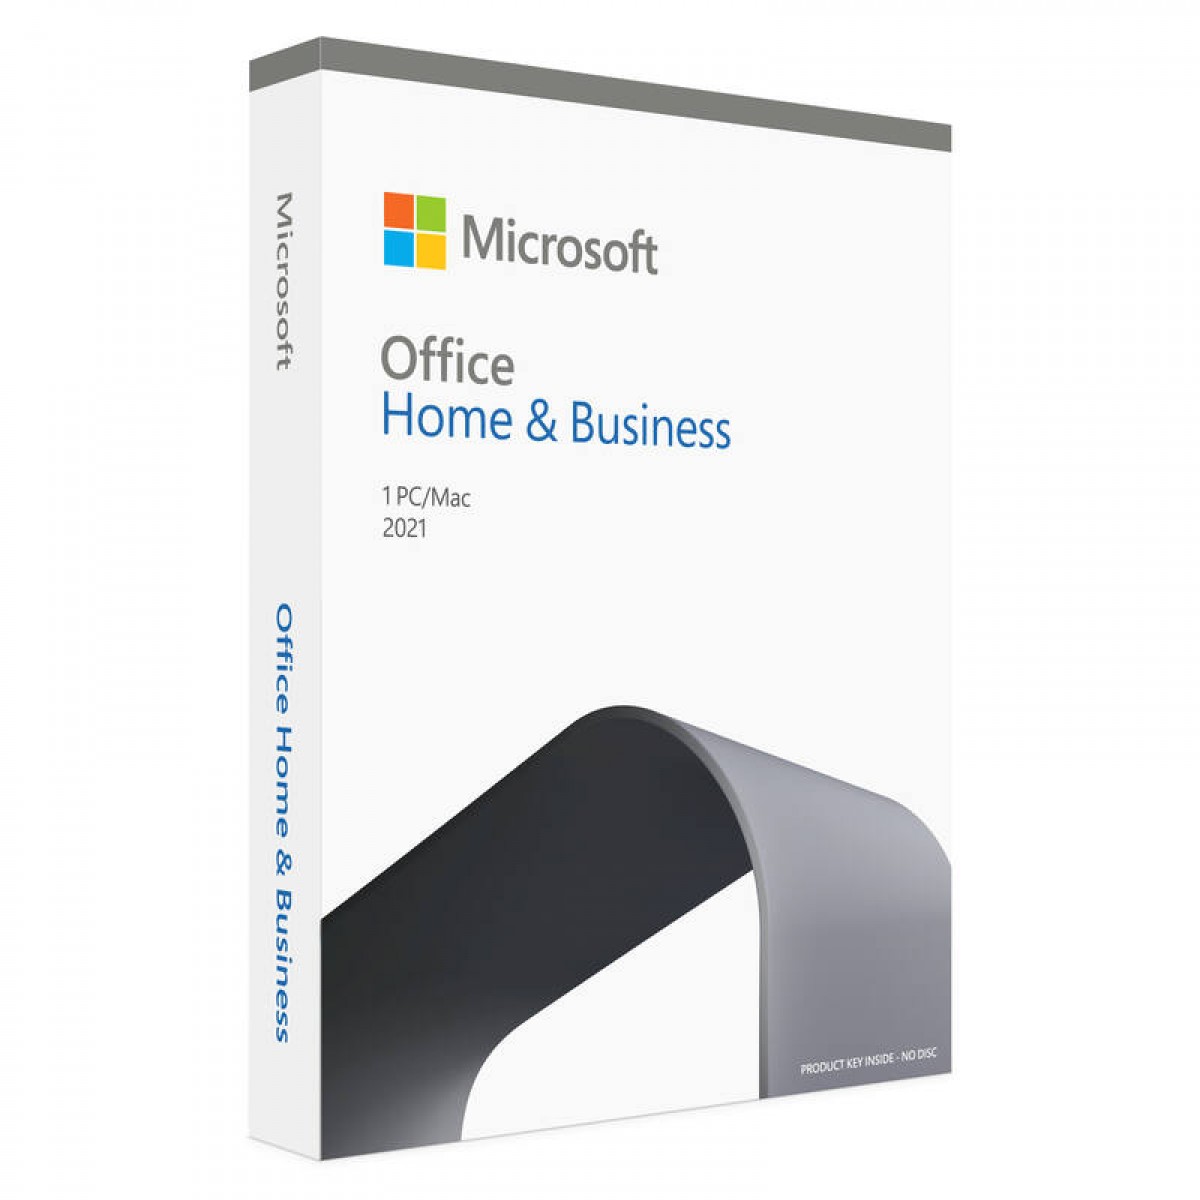 Microsoft Office Home & Business 2021 Retail Pack w/ License Key Card 1 PC/ Mac Digital Download Word, Excel, PowerPoint, OneNote & Outlook